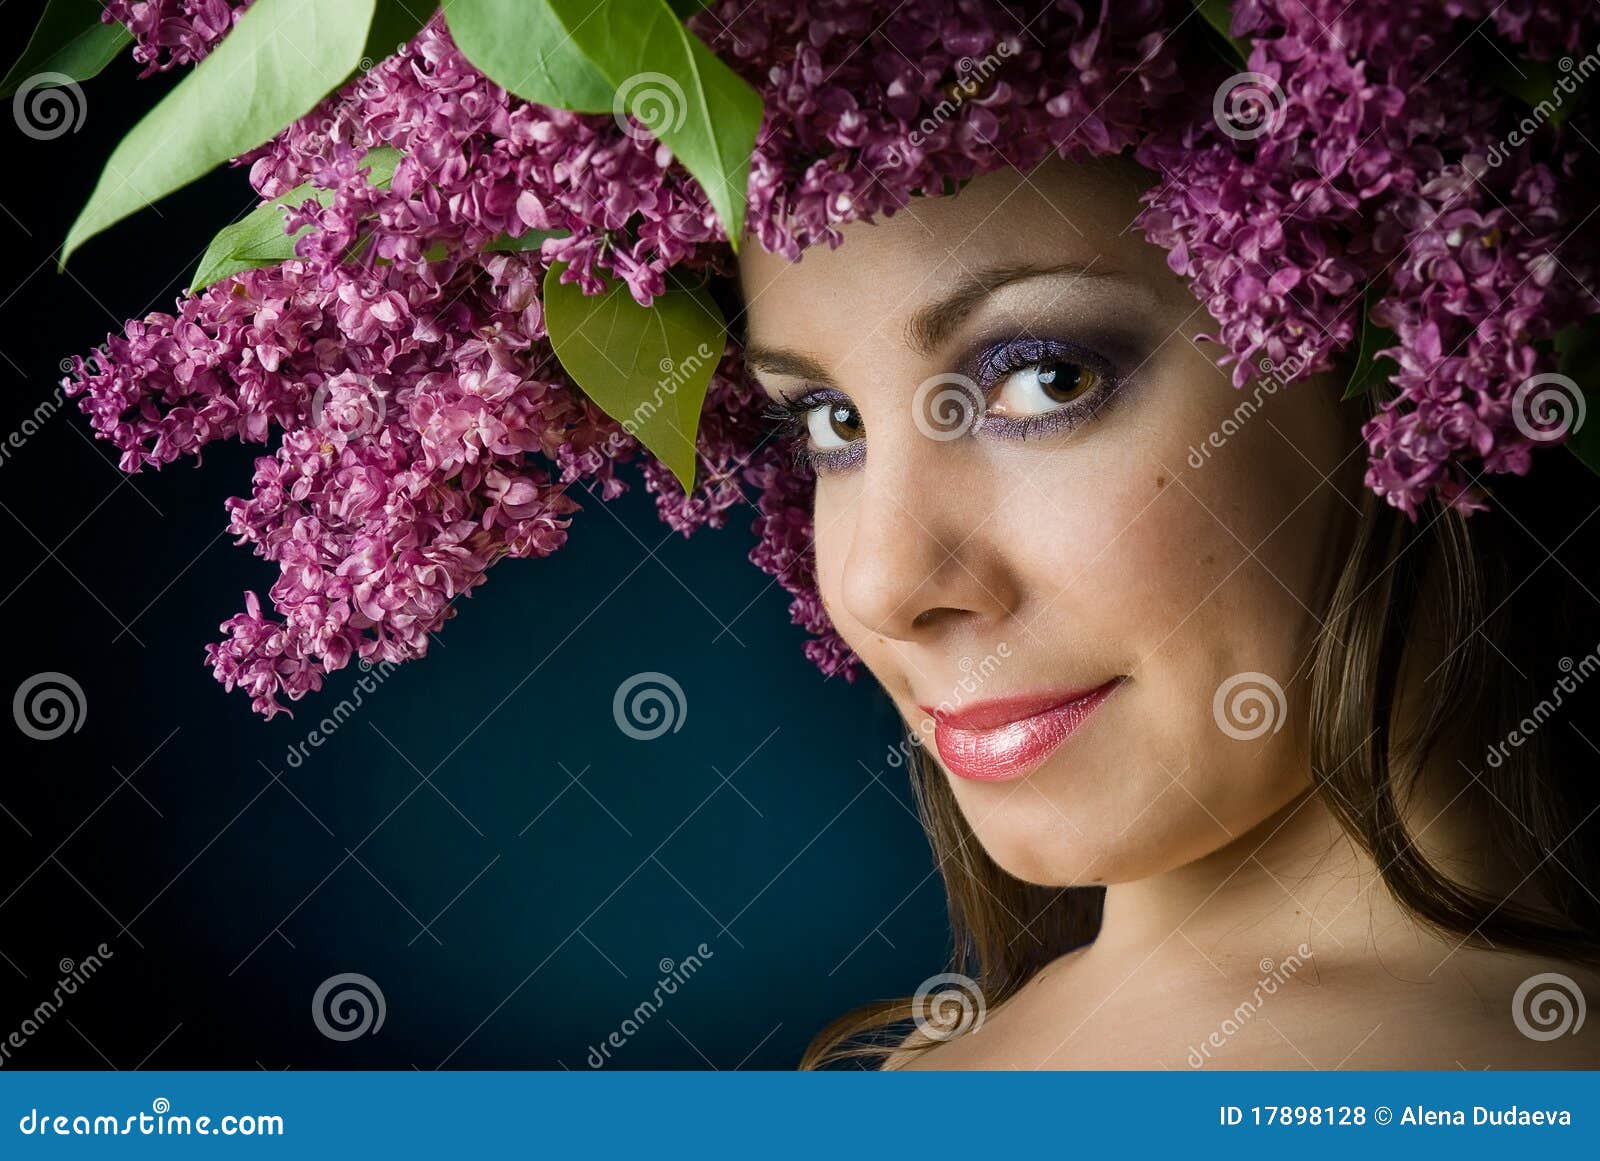 Girl with a wreath of lilac on the head